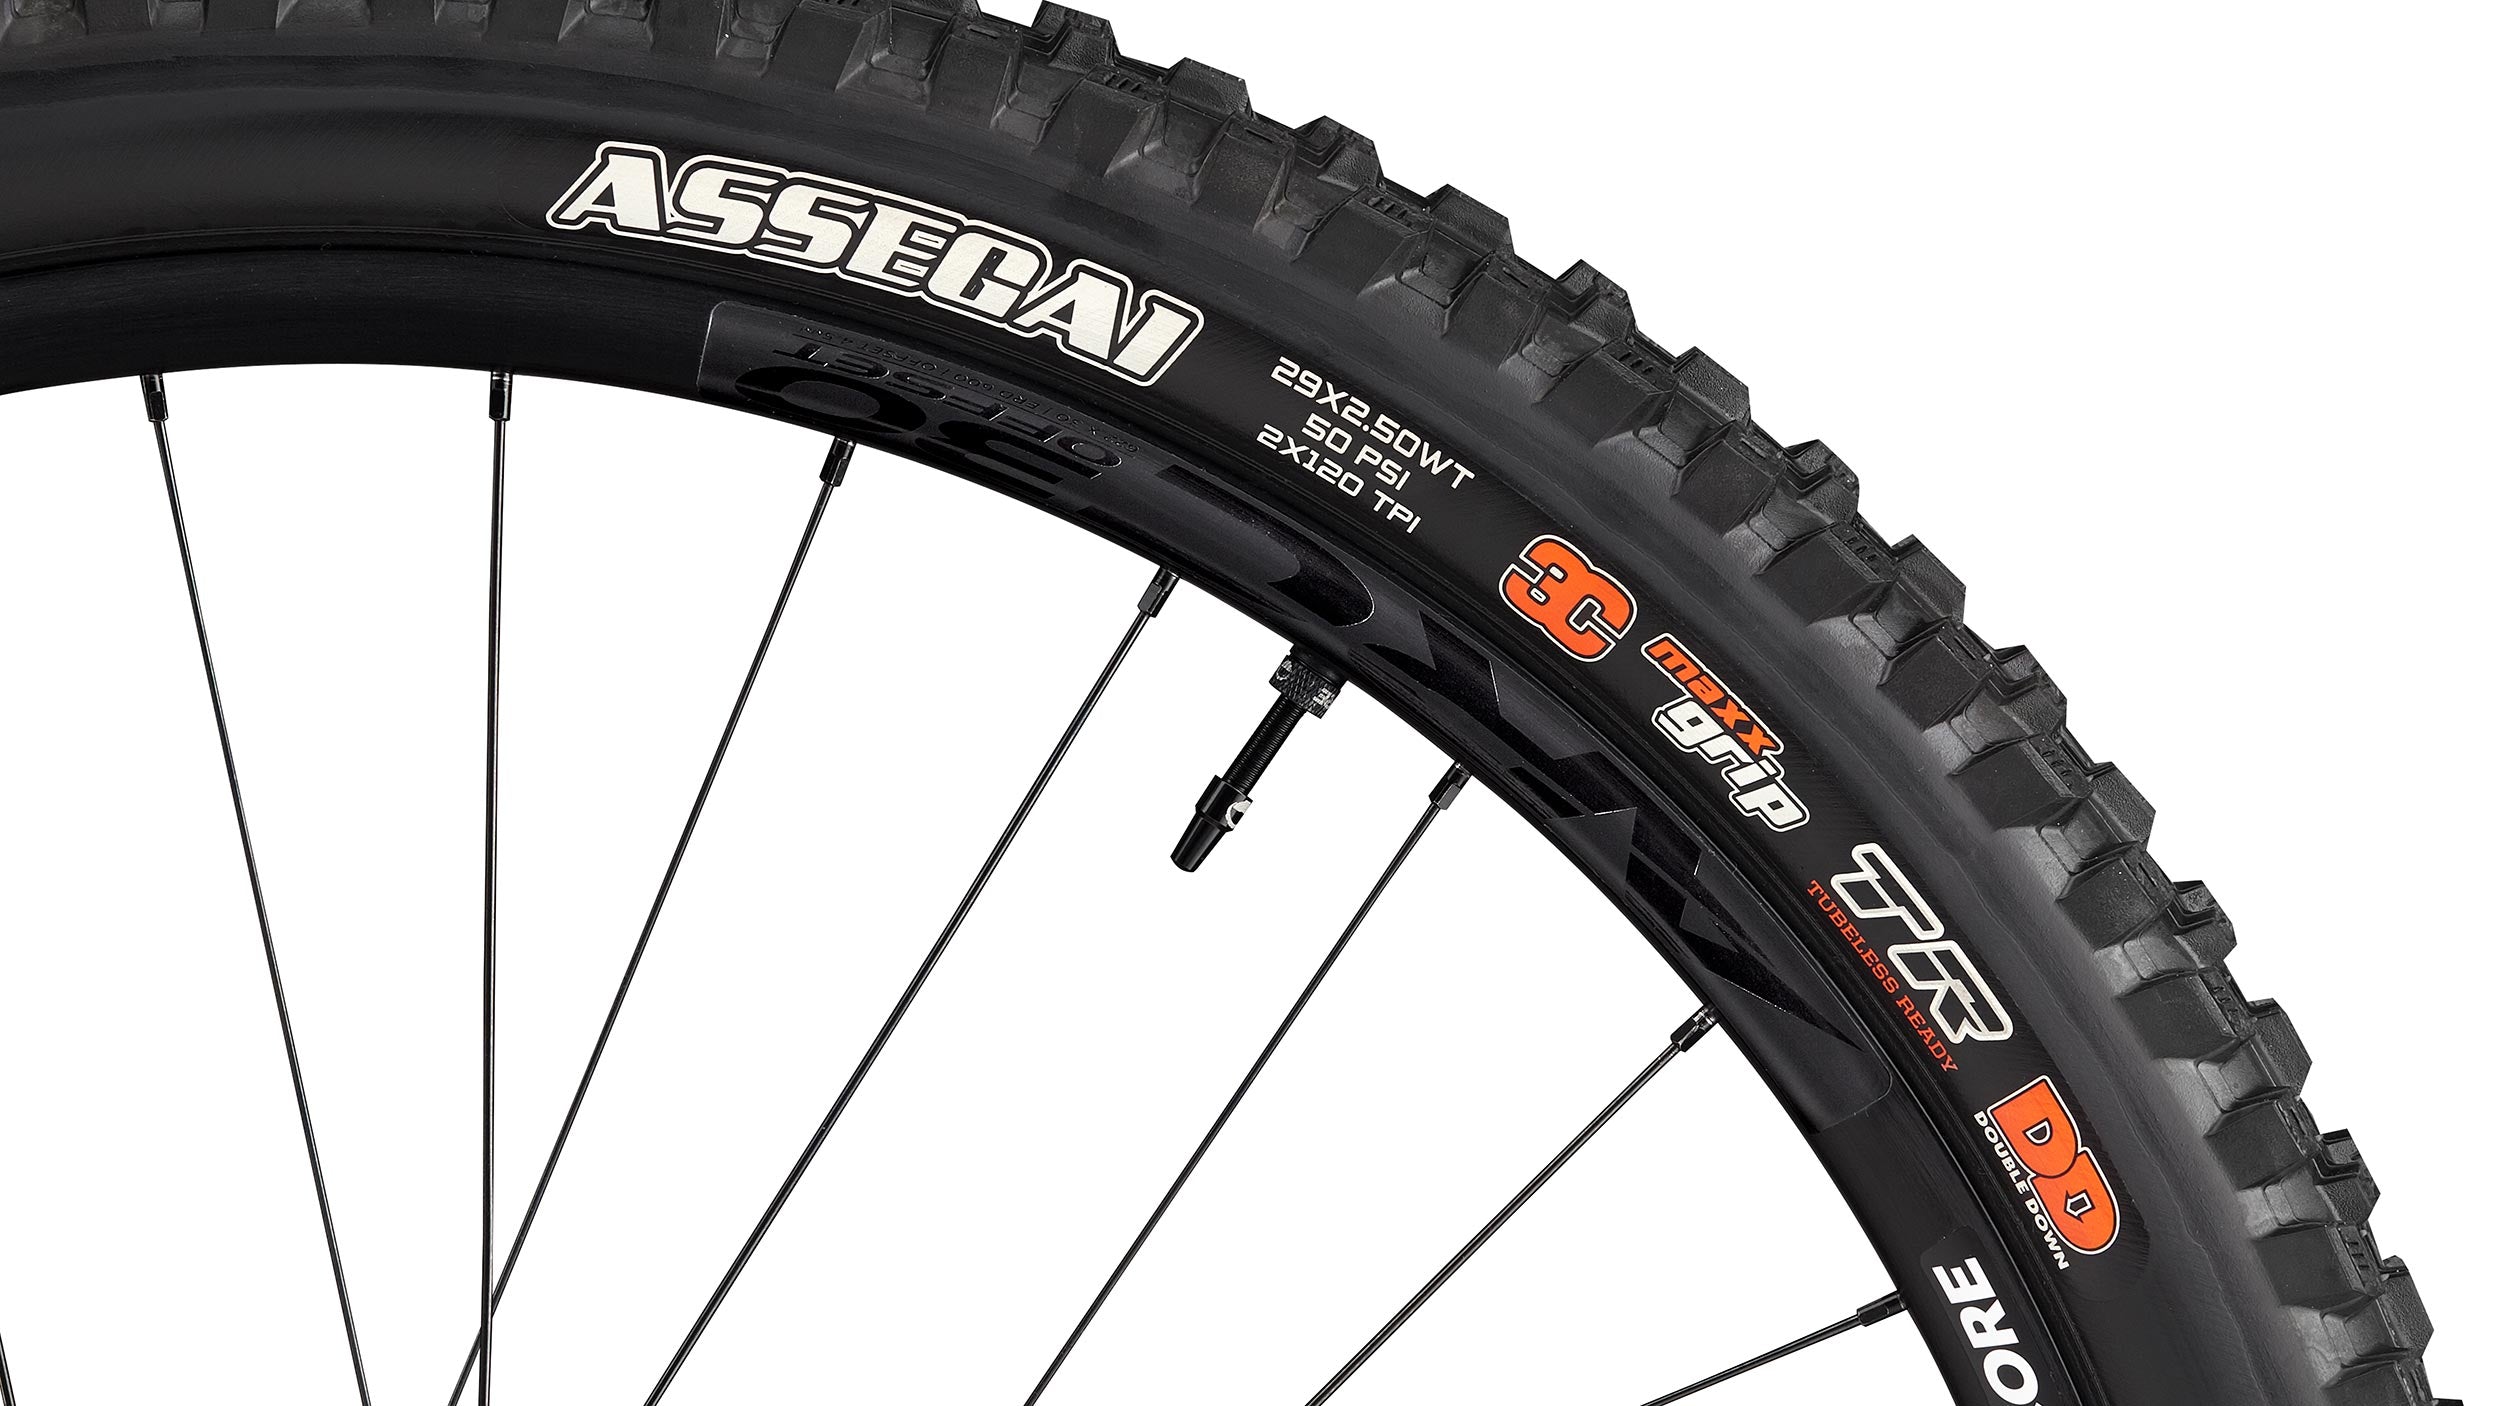 _caption_Enhance your traction and protection with Maxxis DoubleDown tires paired with CushCore XC tire inserts. This combination delivers optimal grip, support, and durability, providing confidence on challenging trails.